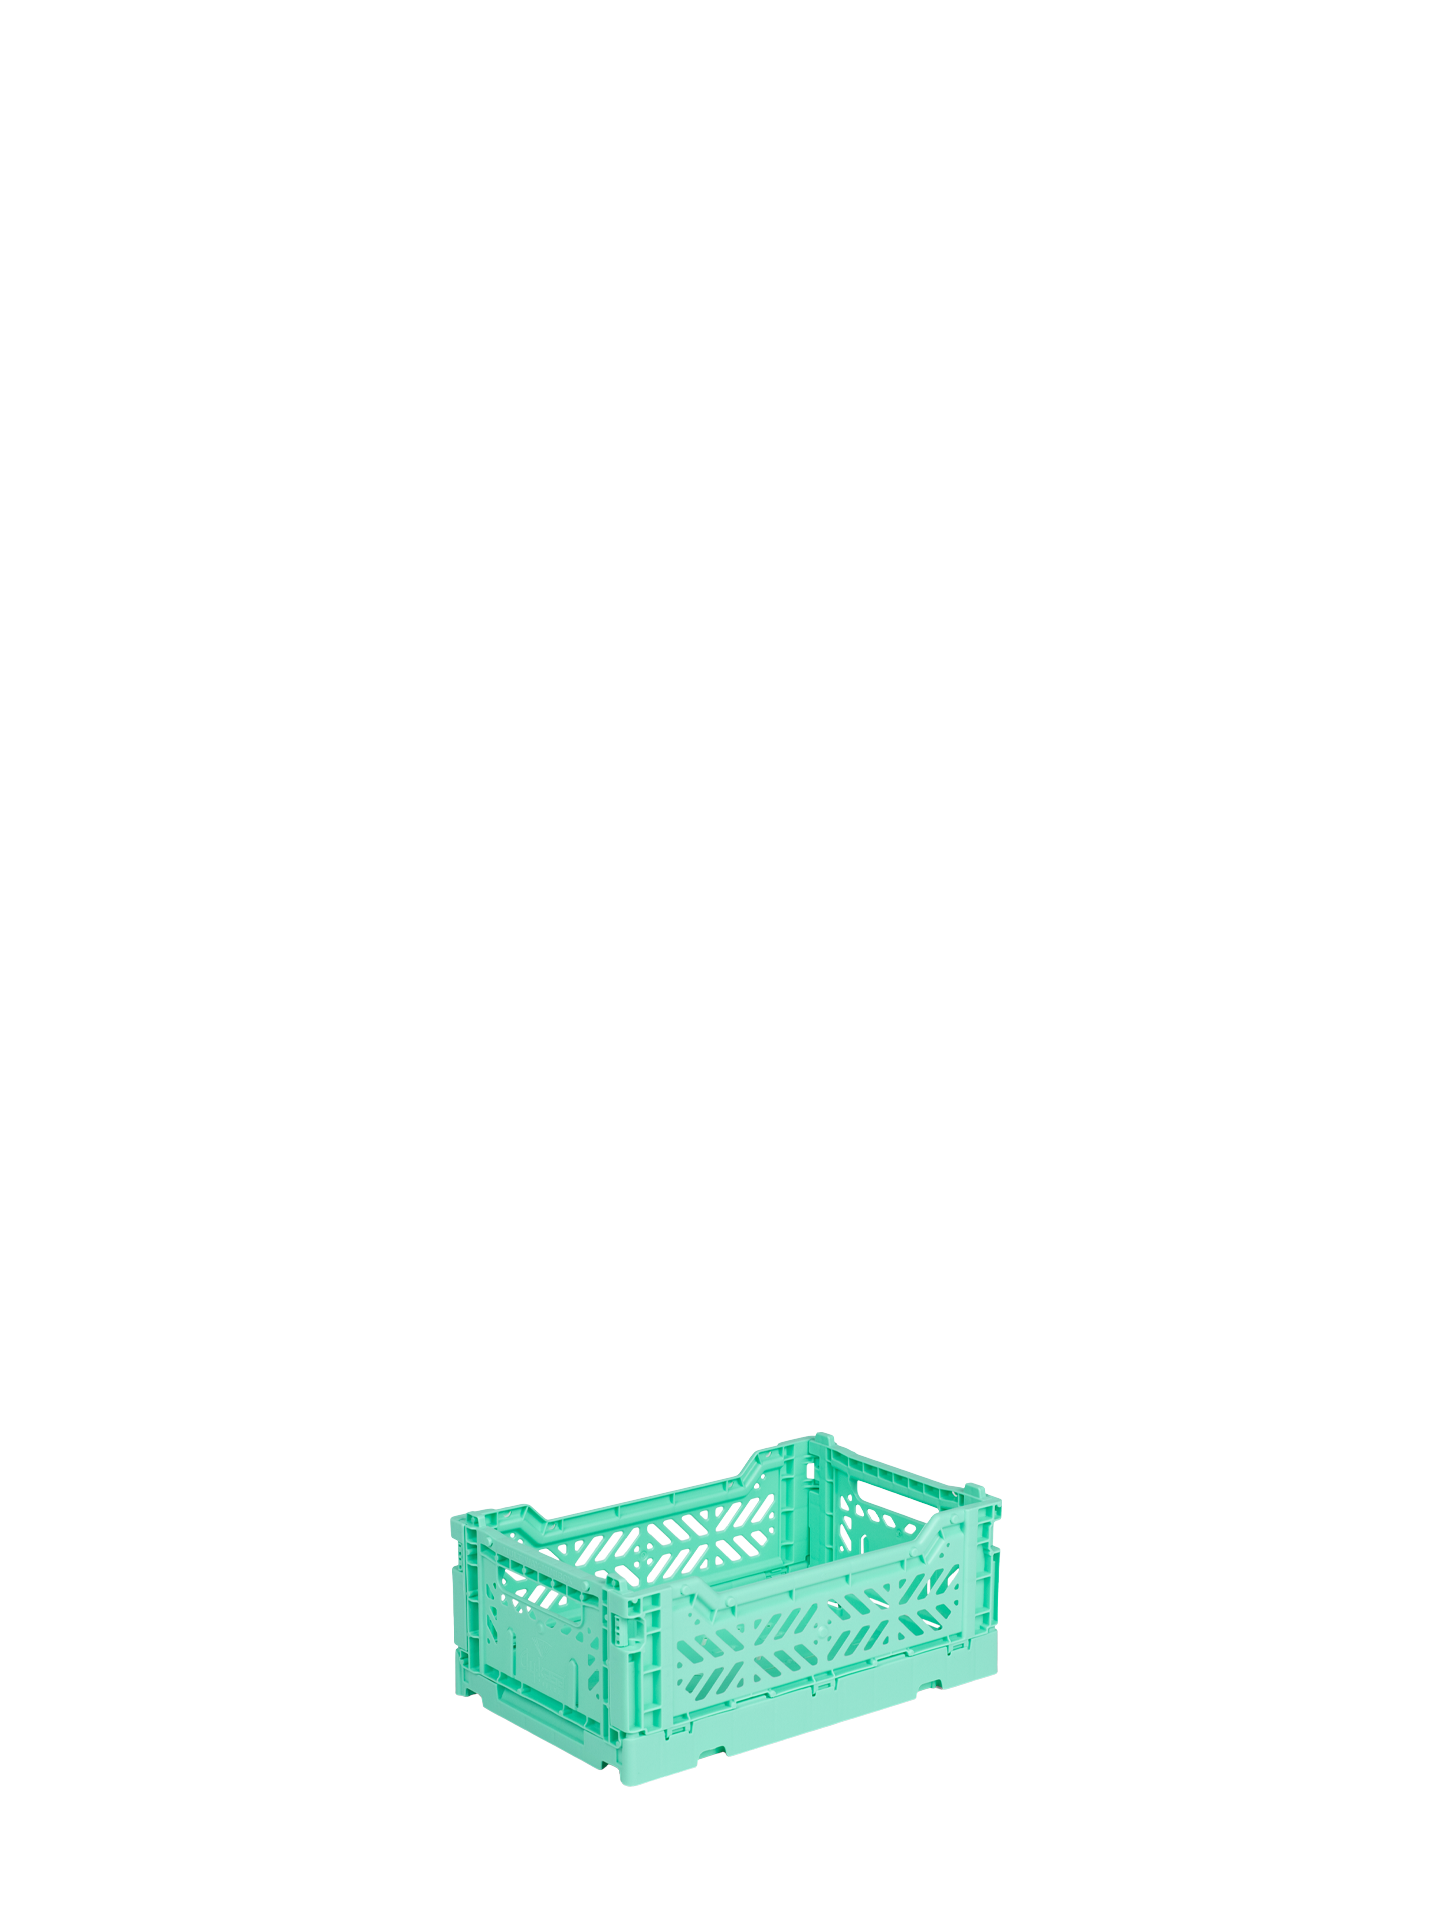 Mini Aykasa crate in pastel mint stacks and folds